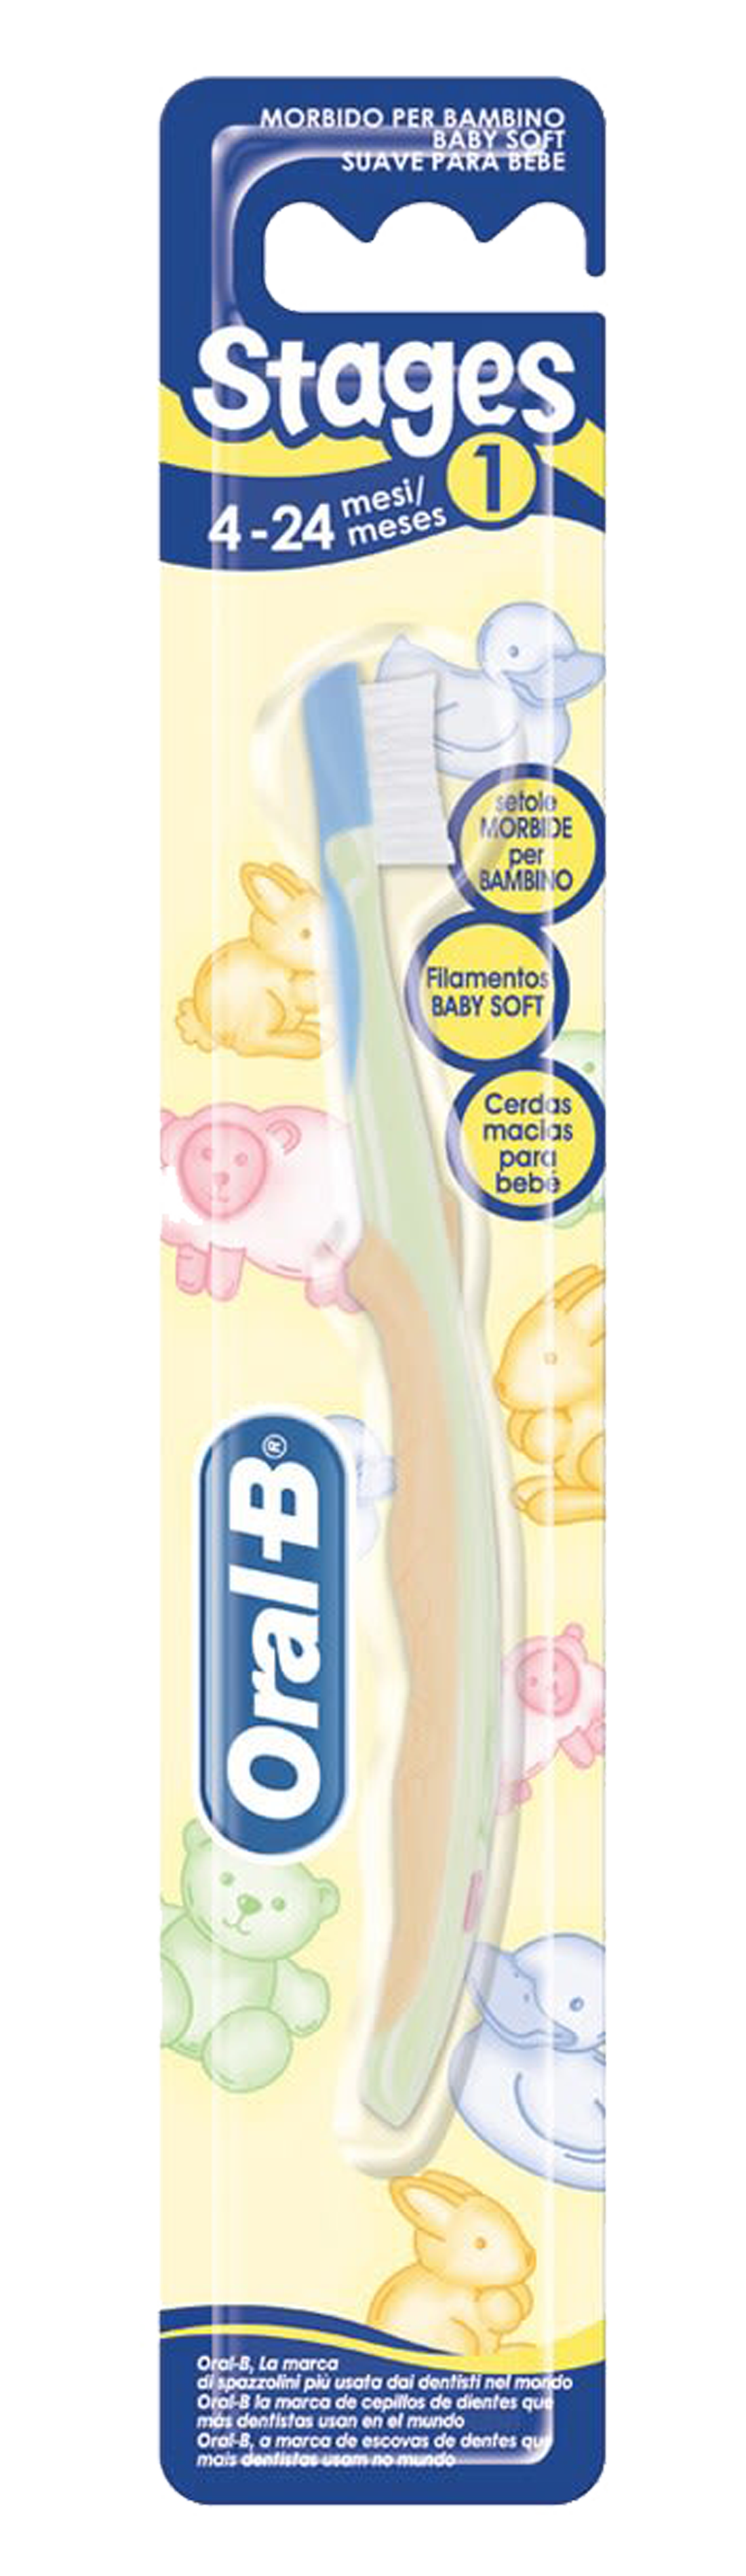 Spazzolino manuale Oral-B Stages 1 undefined